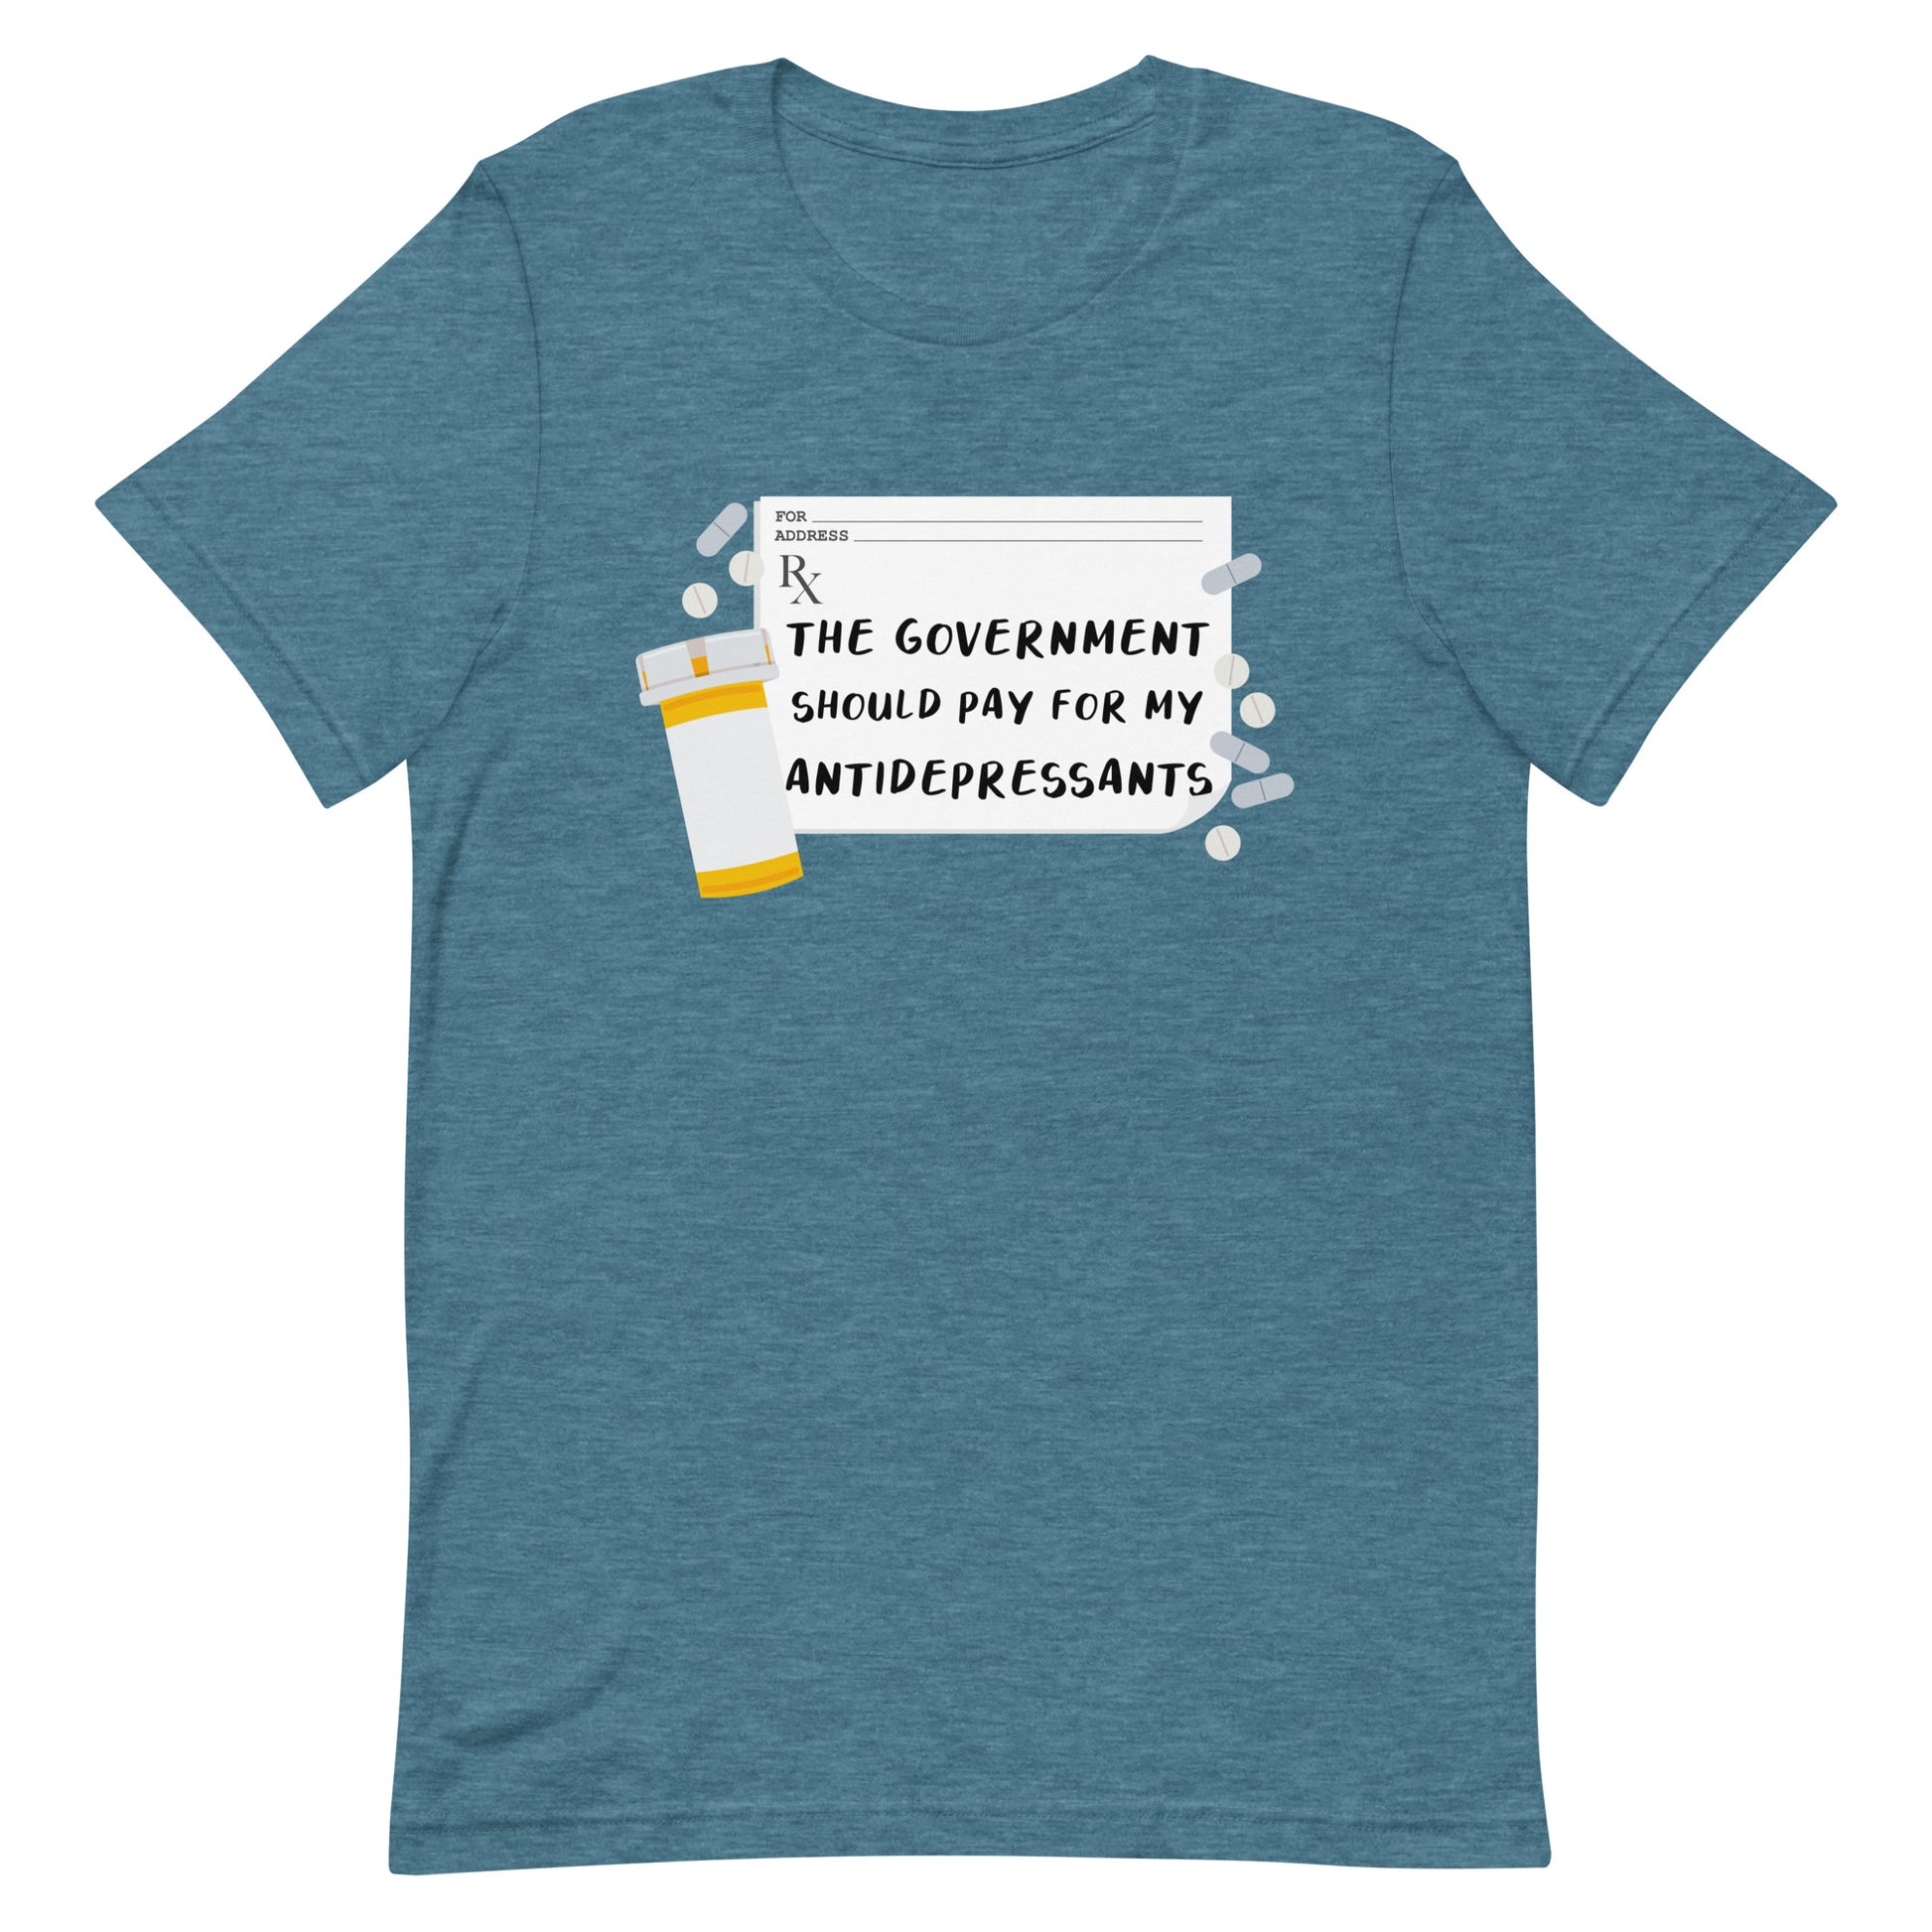 A heathered teal crewneck t-shirt featuring an image of a subscription page with text that reads "The government should pay for my antidepressants". Pills and an empty orange pill bottle surround the RX sheet.